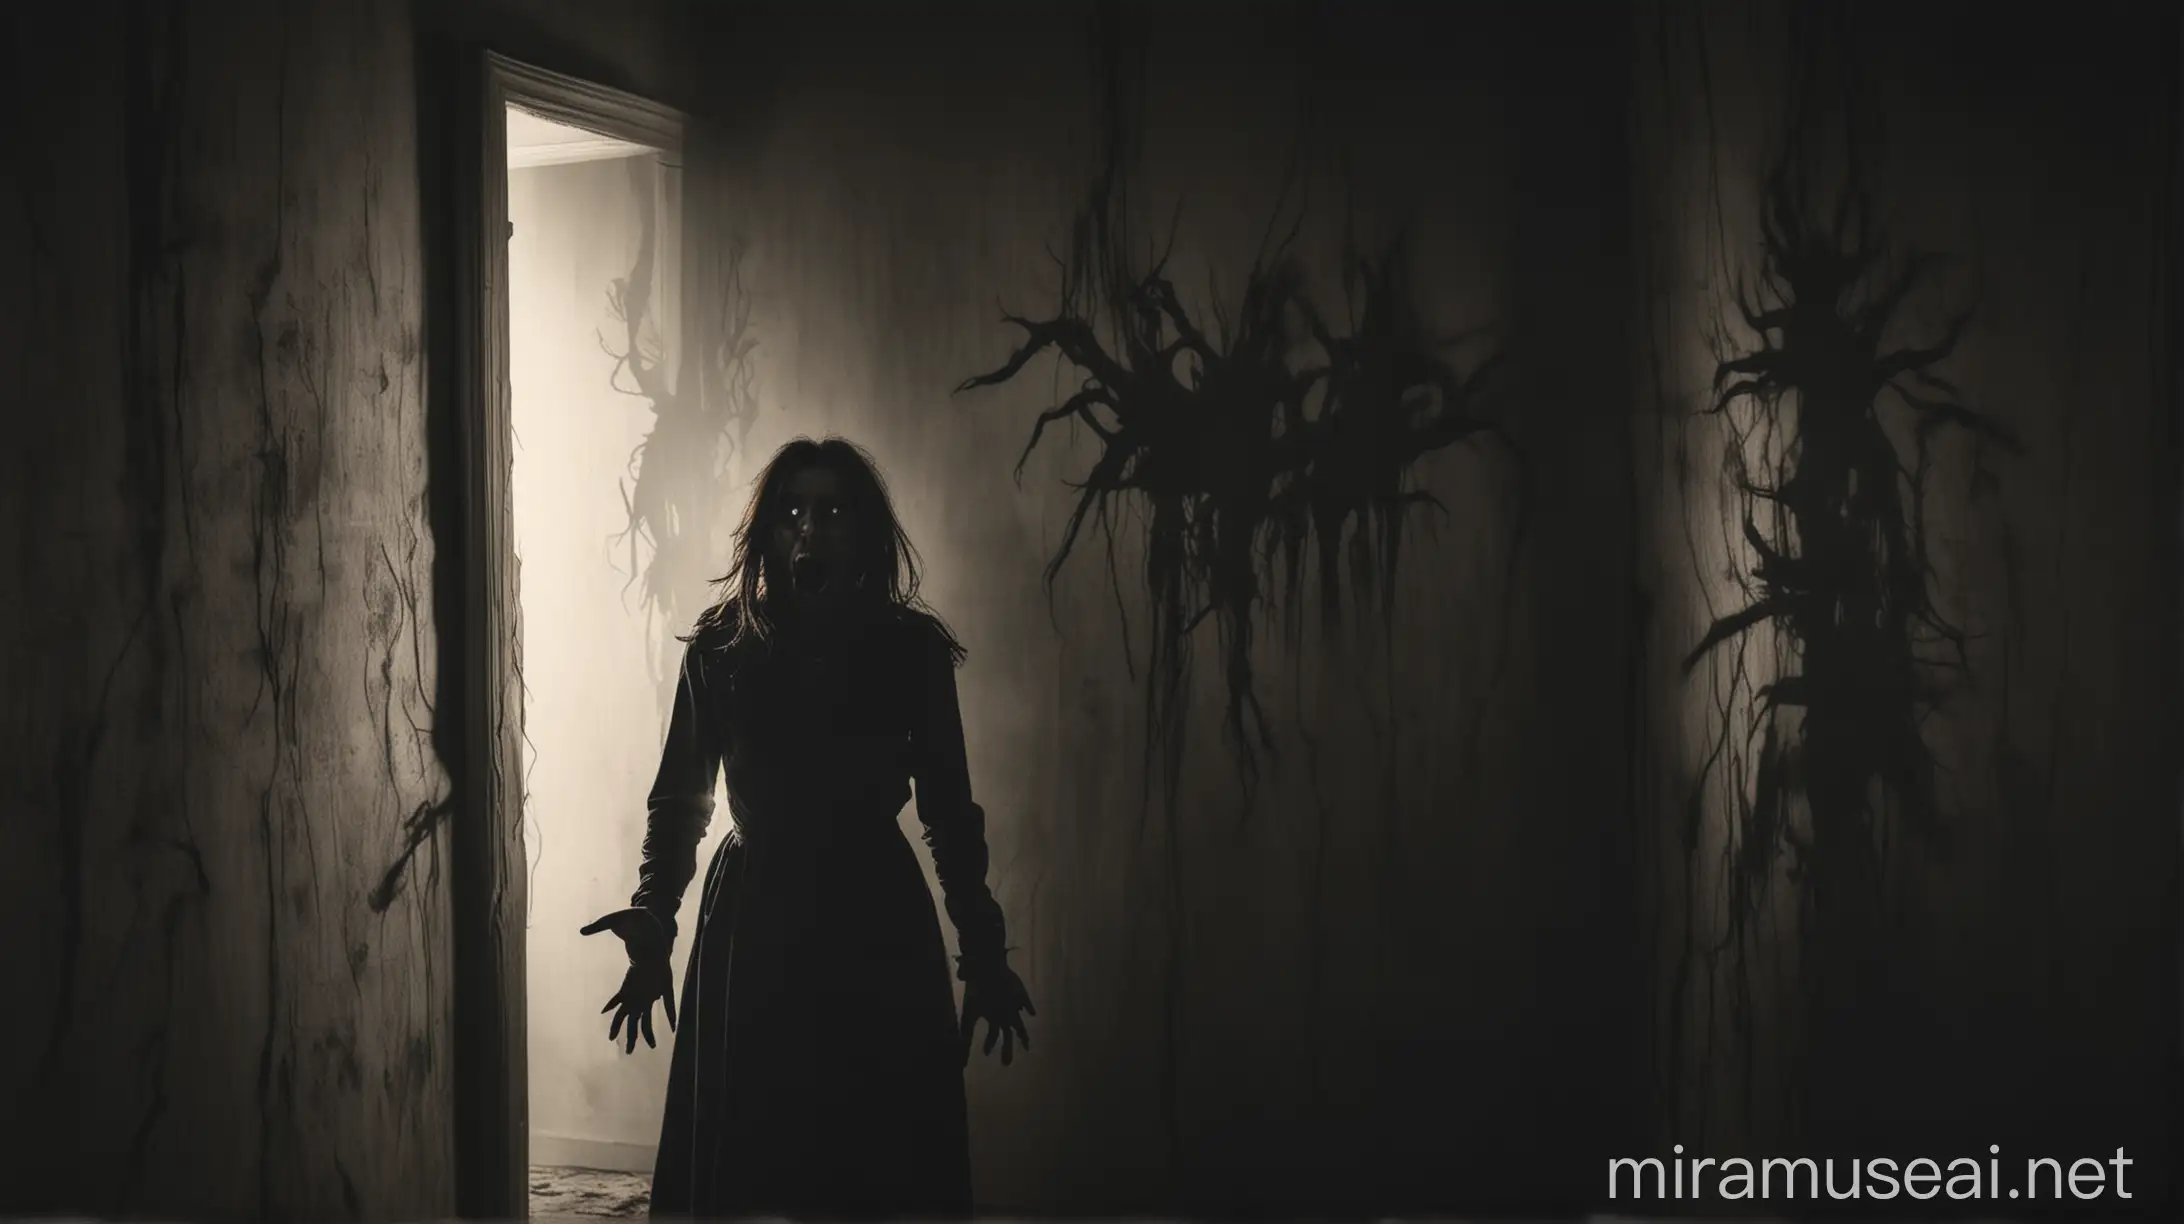 
Create an image of a terrified woman seeing a demonic shadow behind her, terror, creepy
